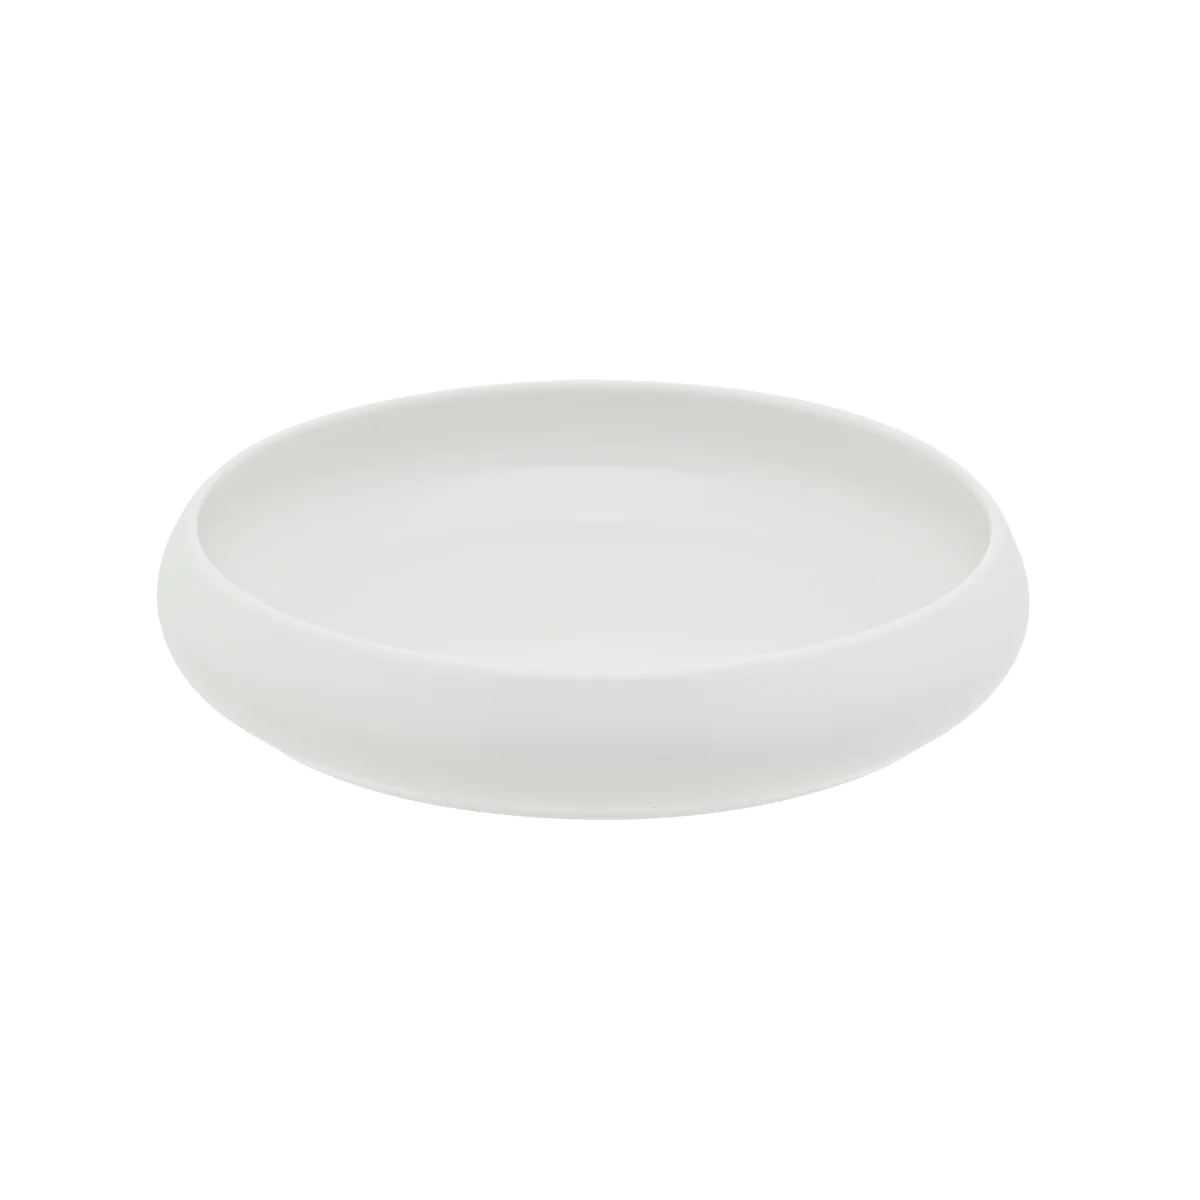 Small Cocotte Degrenne 18 cm Bianco Gourmet